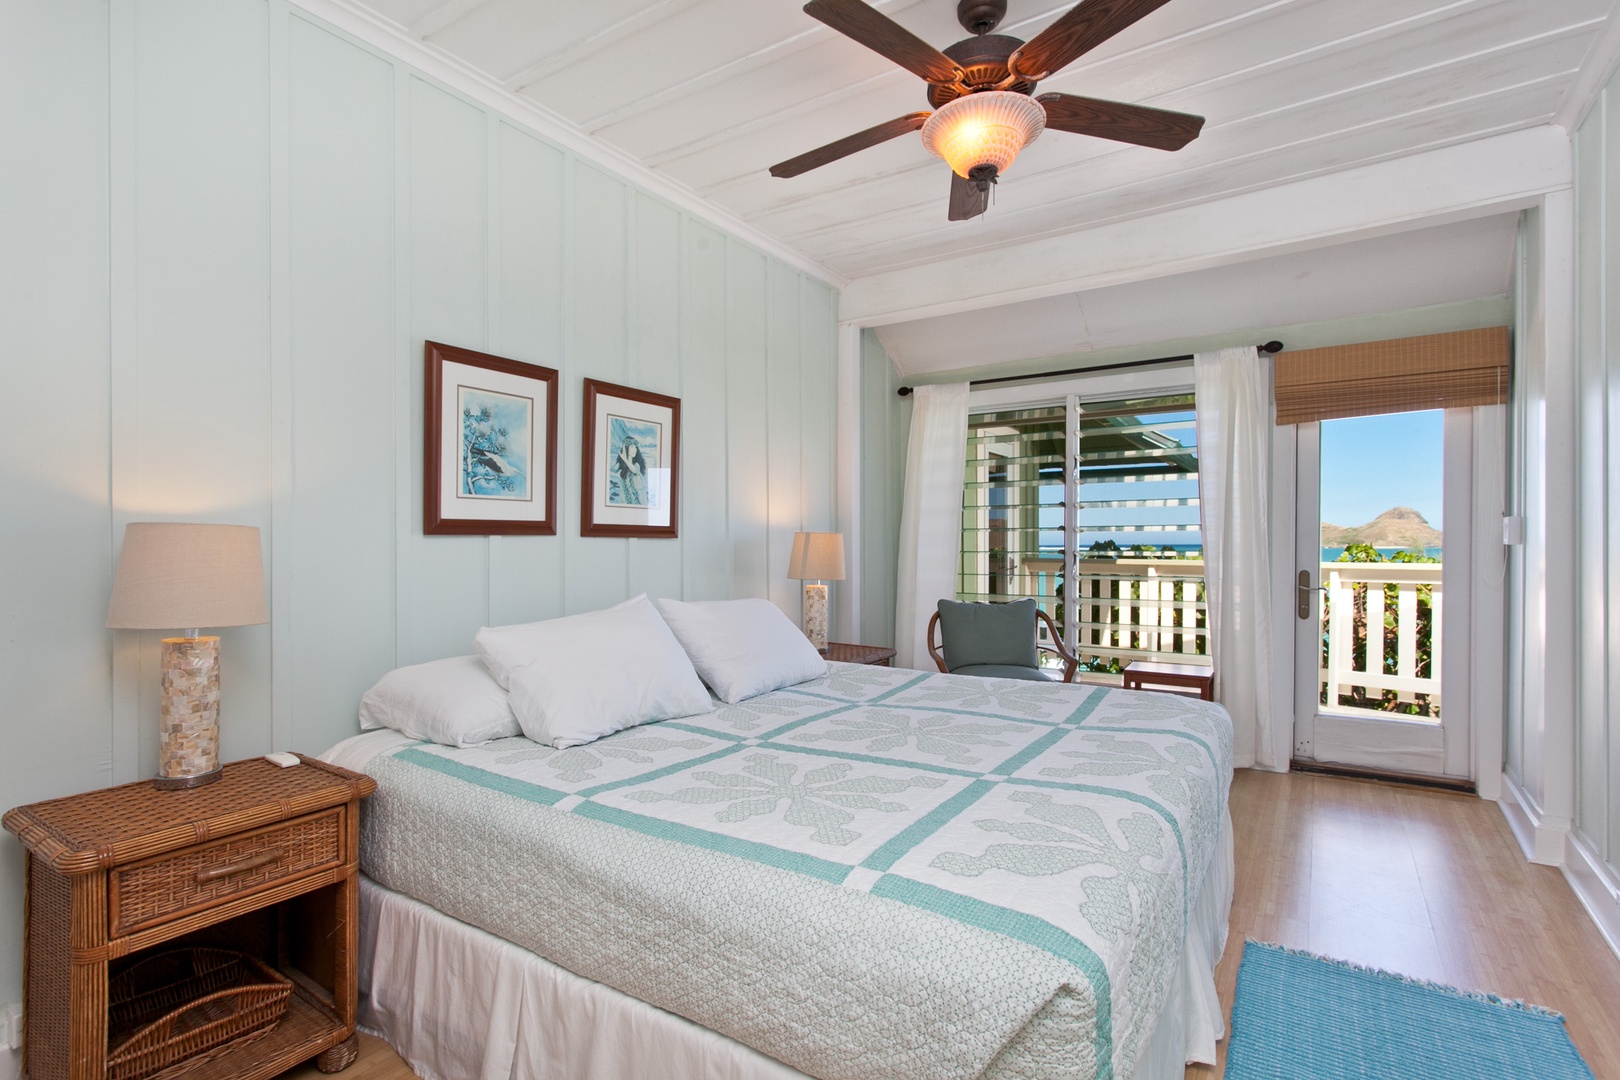 Kailua Vacation Rentals, Lanikai Village* - Hale Kainalu: Guest bedroom features a king bed and access to the lanai.